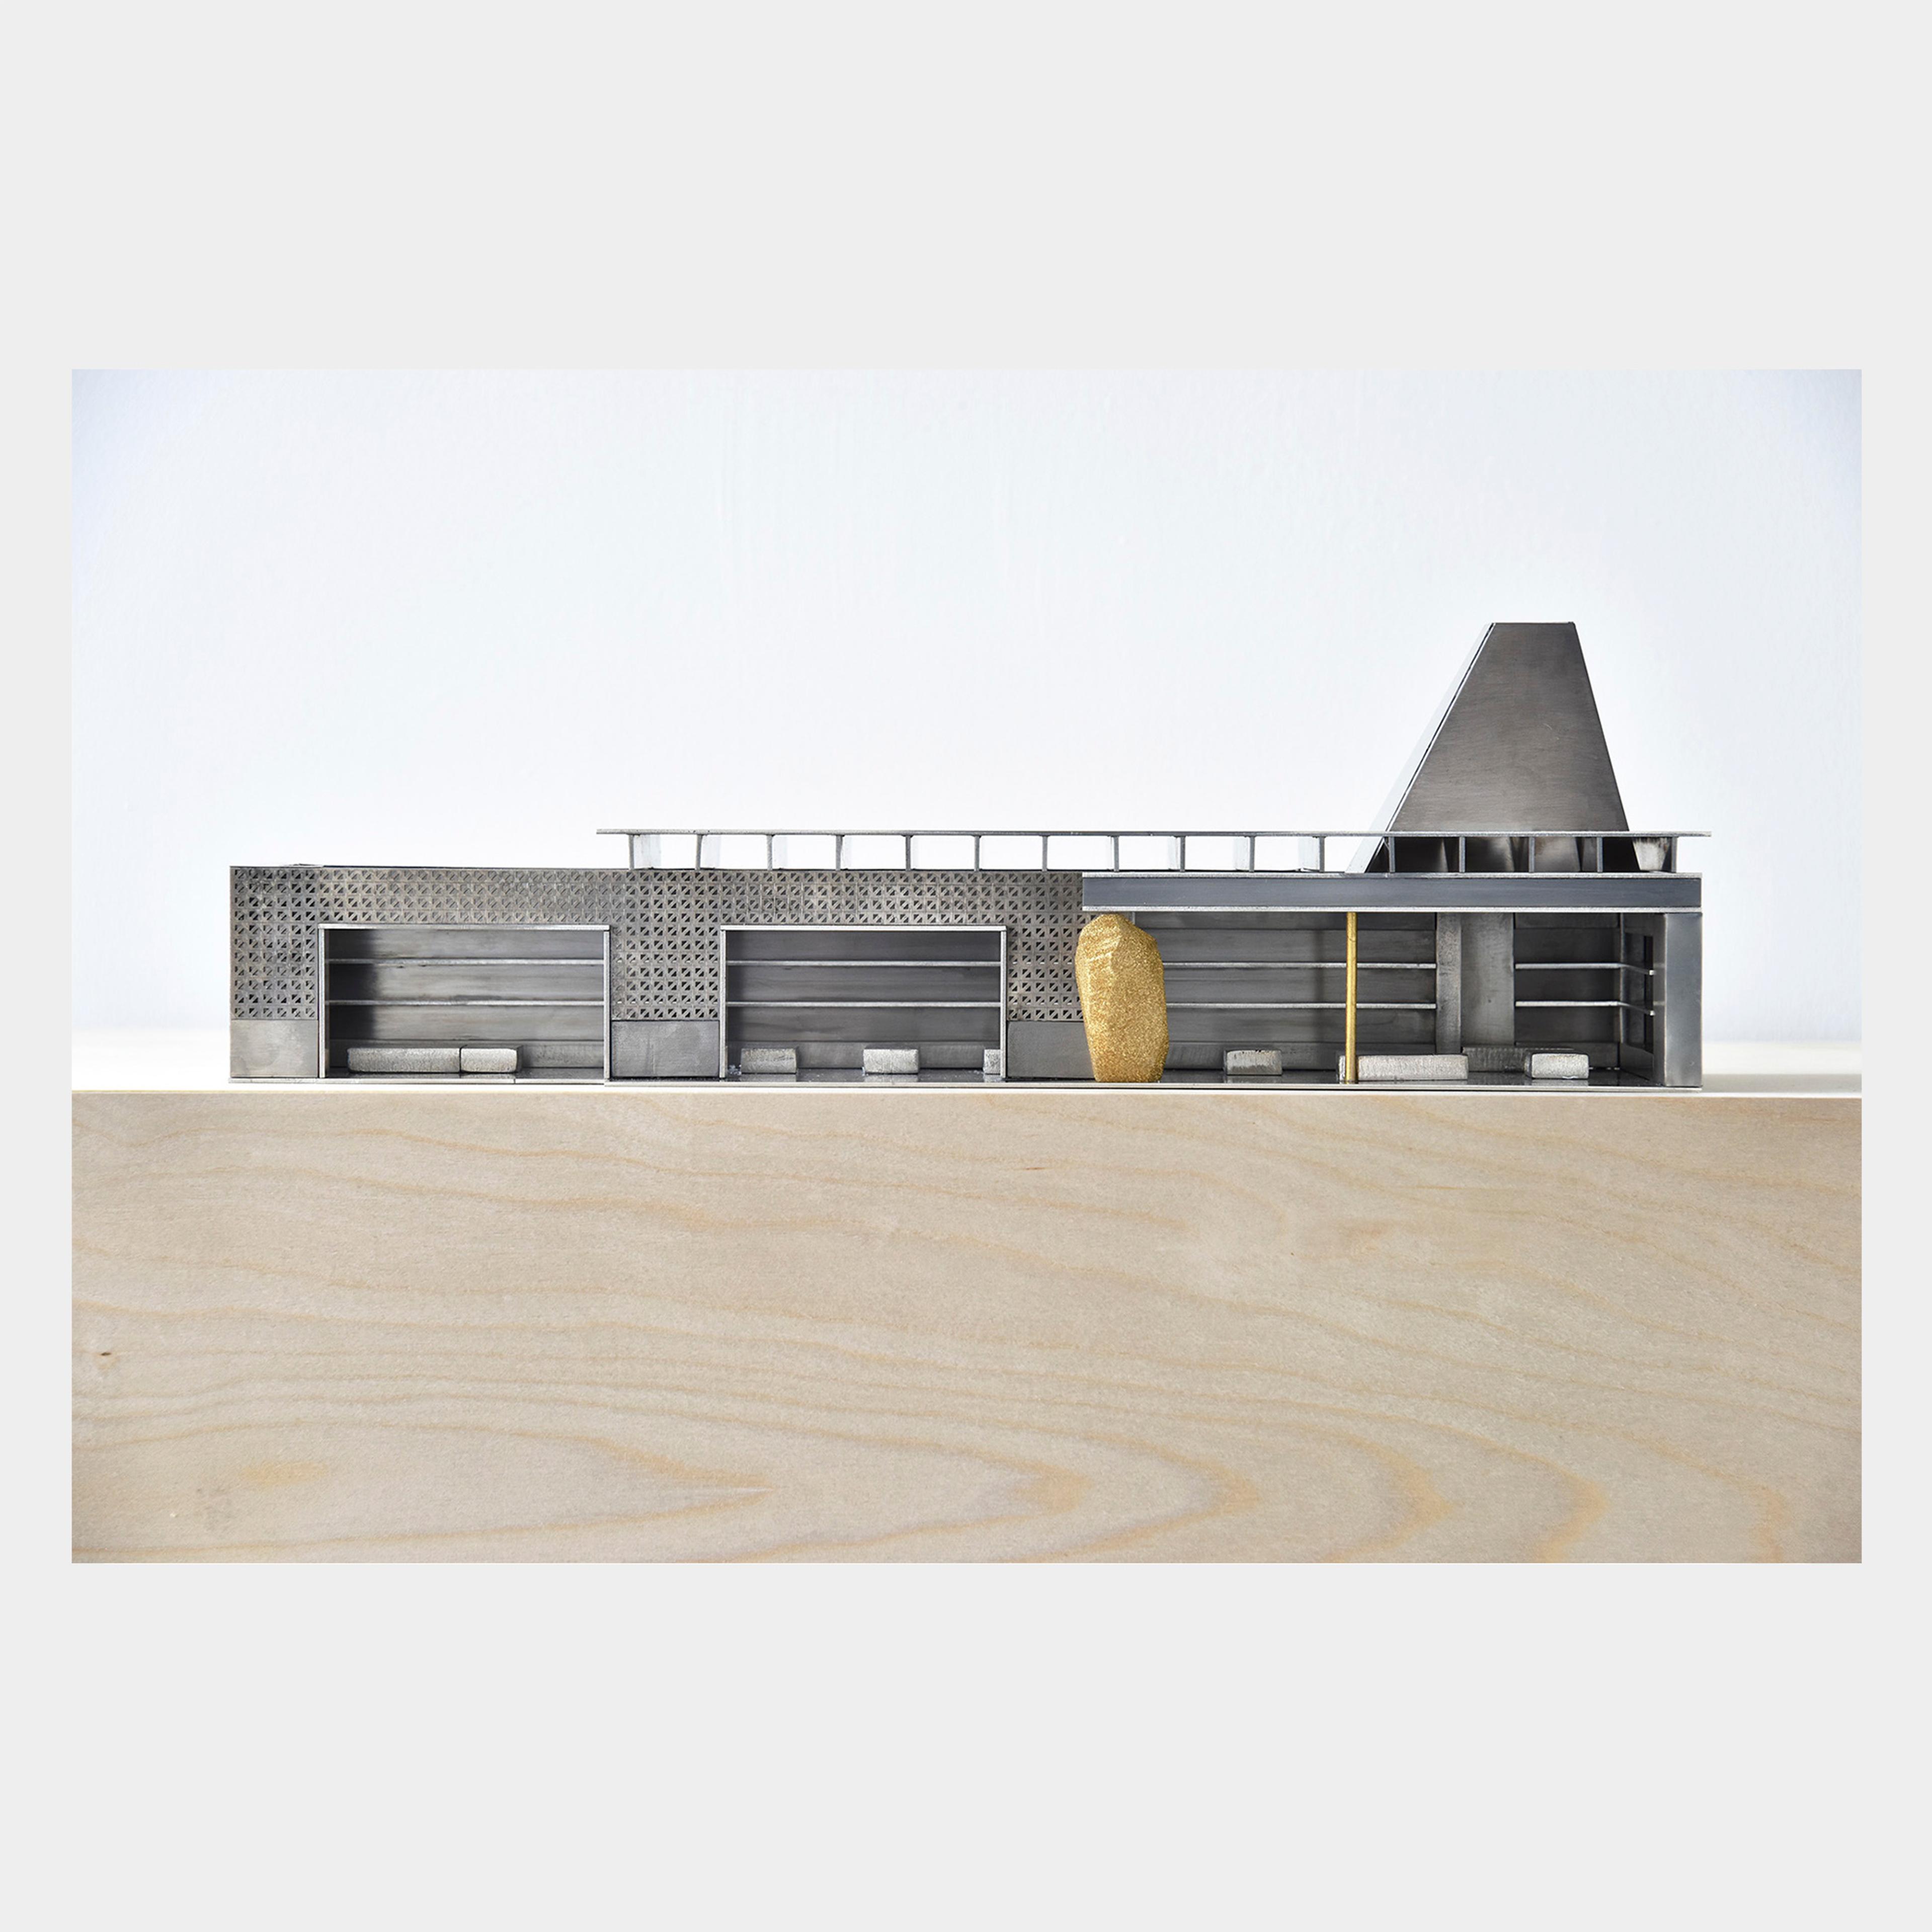 Architectural model of store